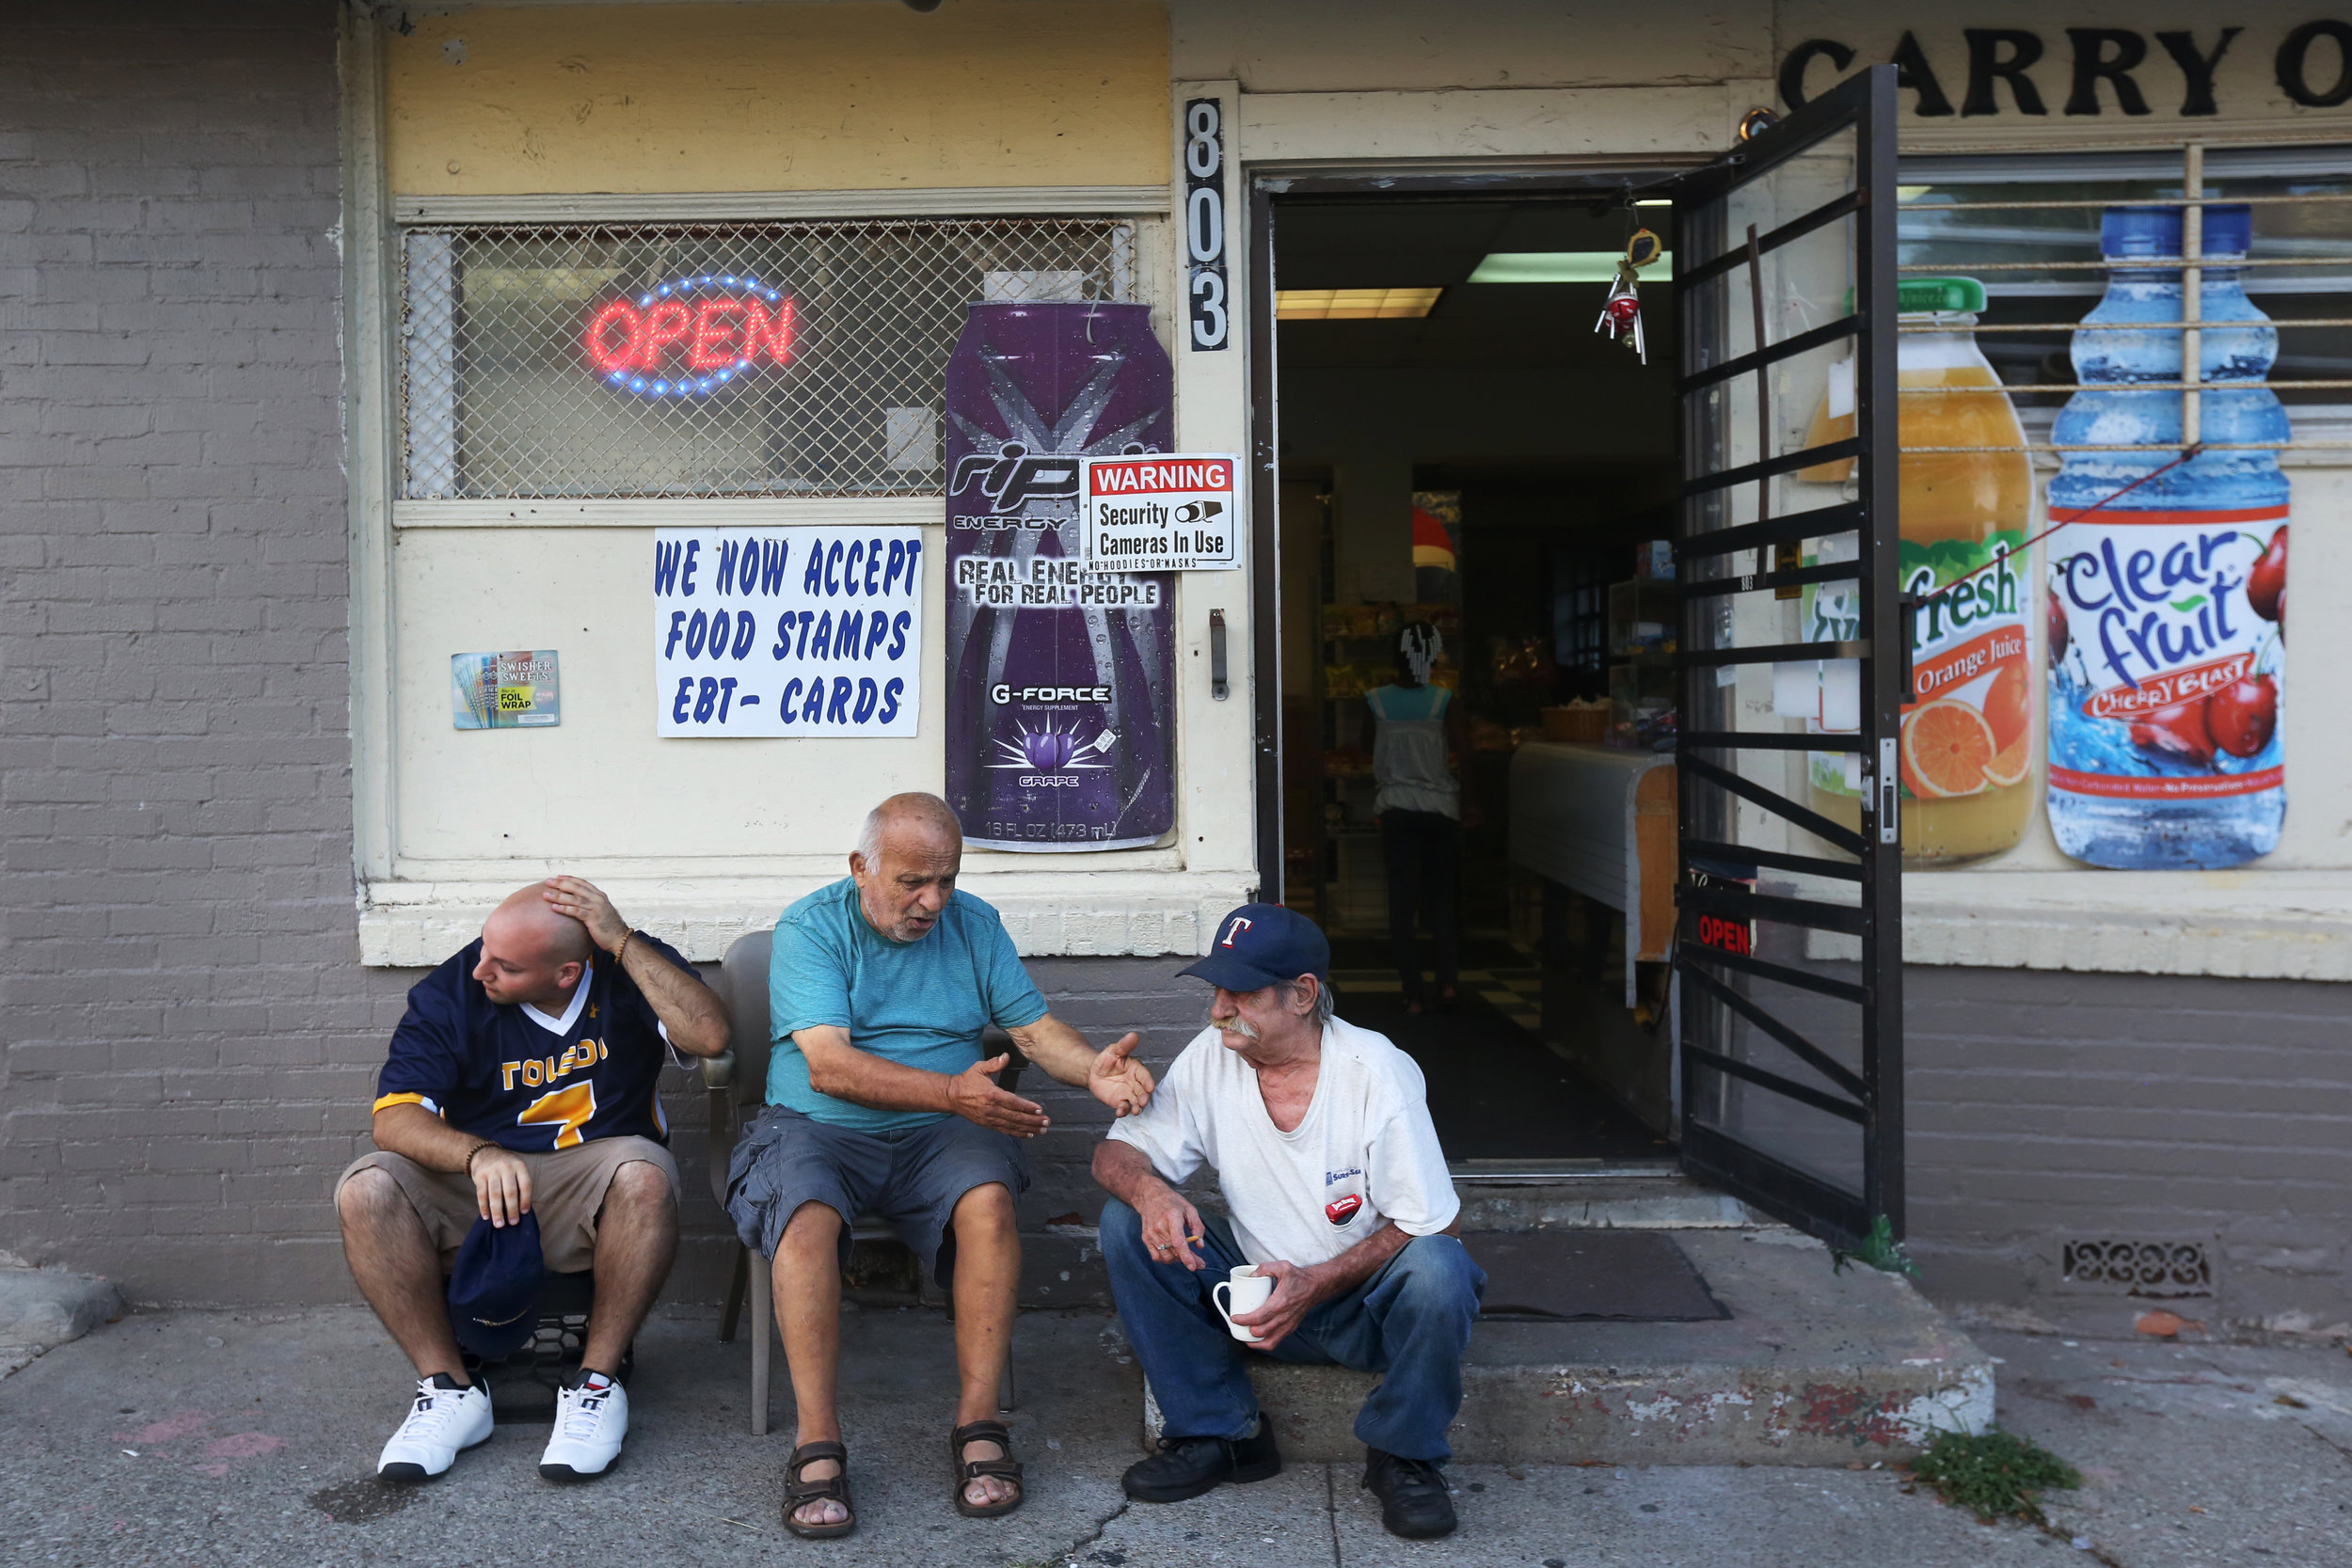  Radi Cheaib, left, listens as his father Hassan, 81, center, talks with their neighbor Kenneth Berry, right, about the perils of smoking outside Bush Carry Out in Toledo's North End. Hassan owns the carry-out, where he often spends time talking with